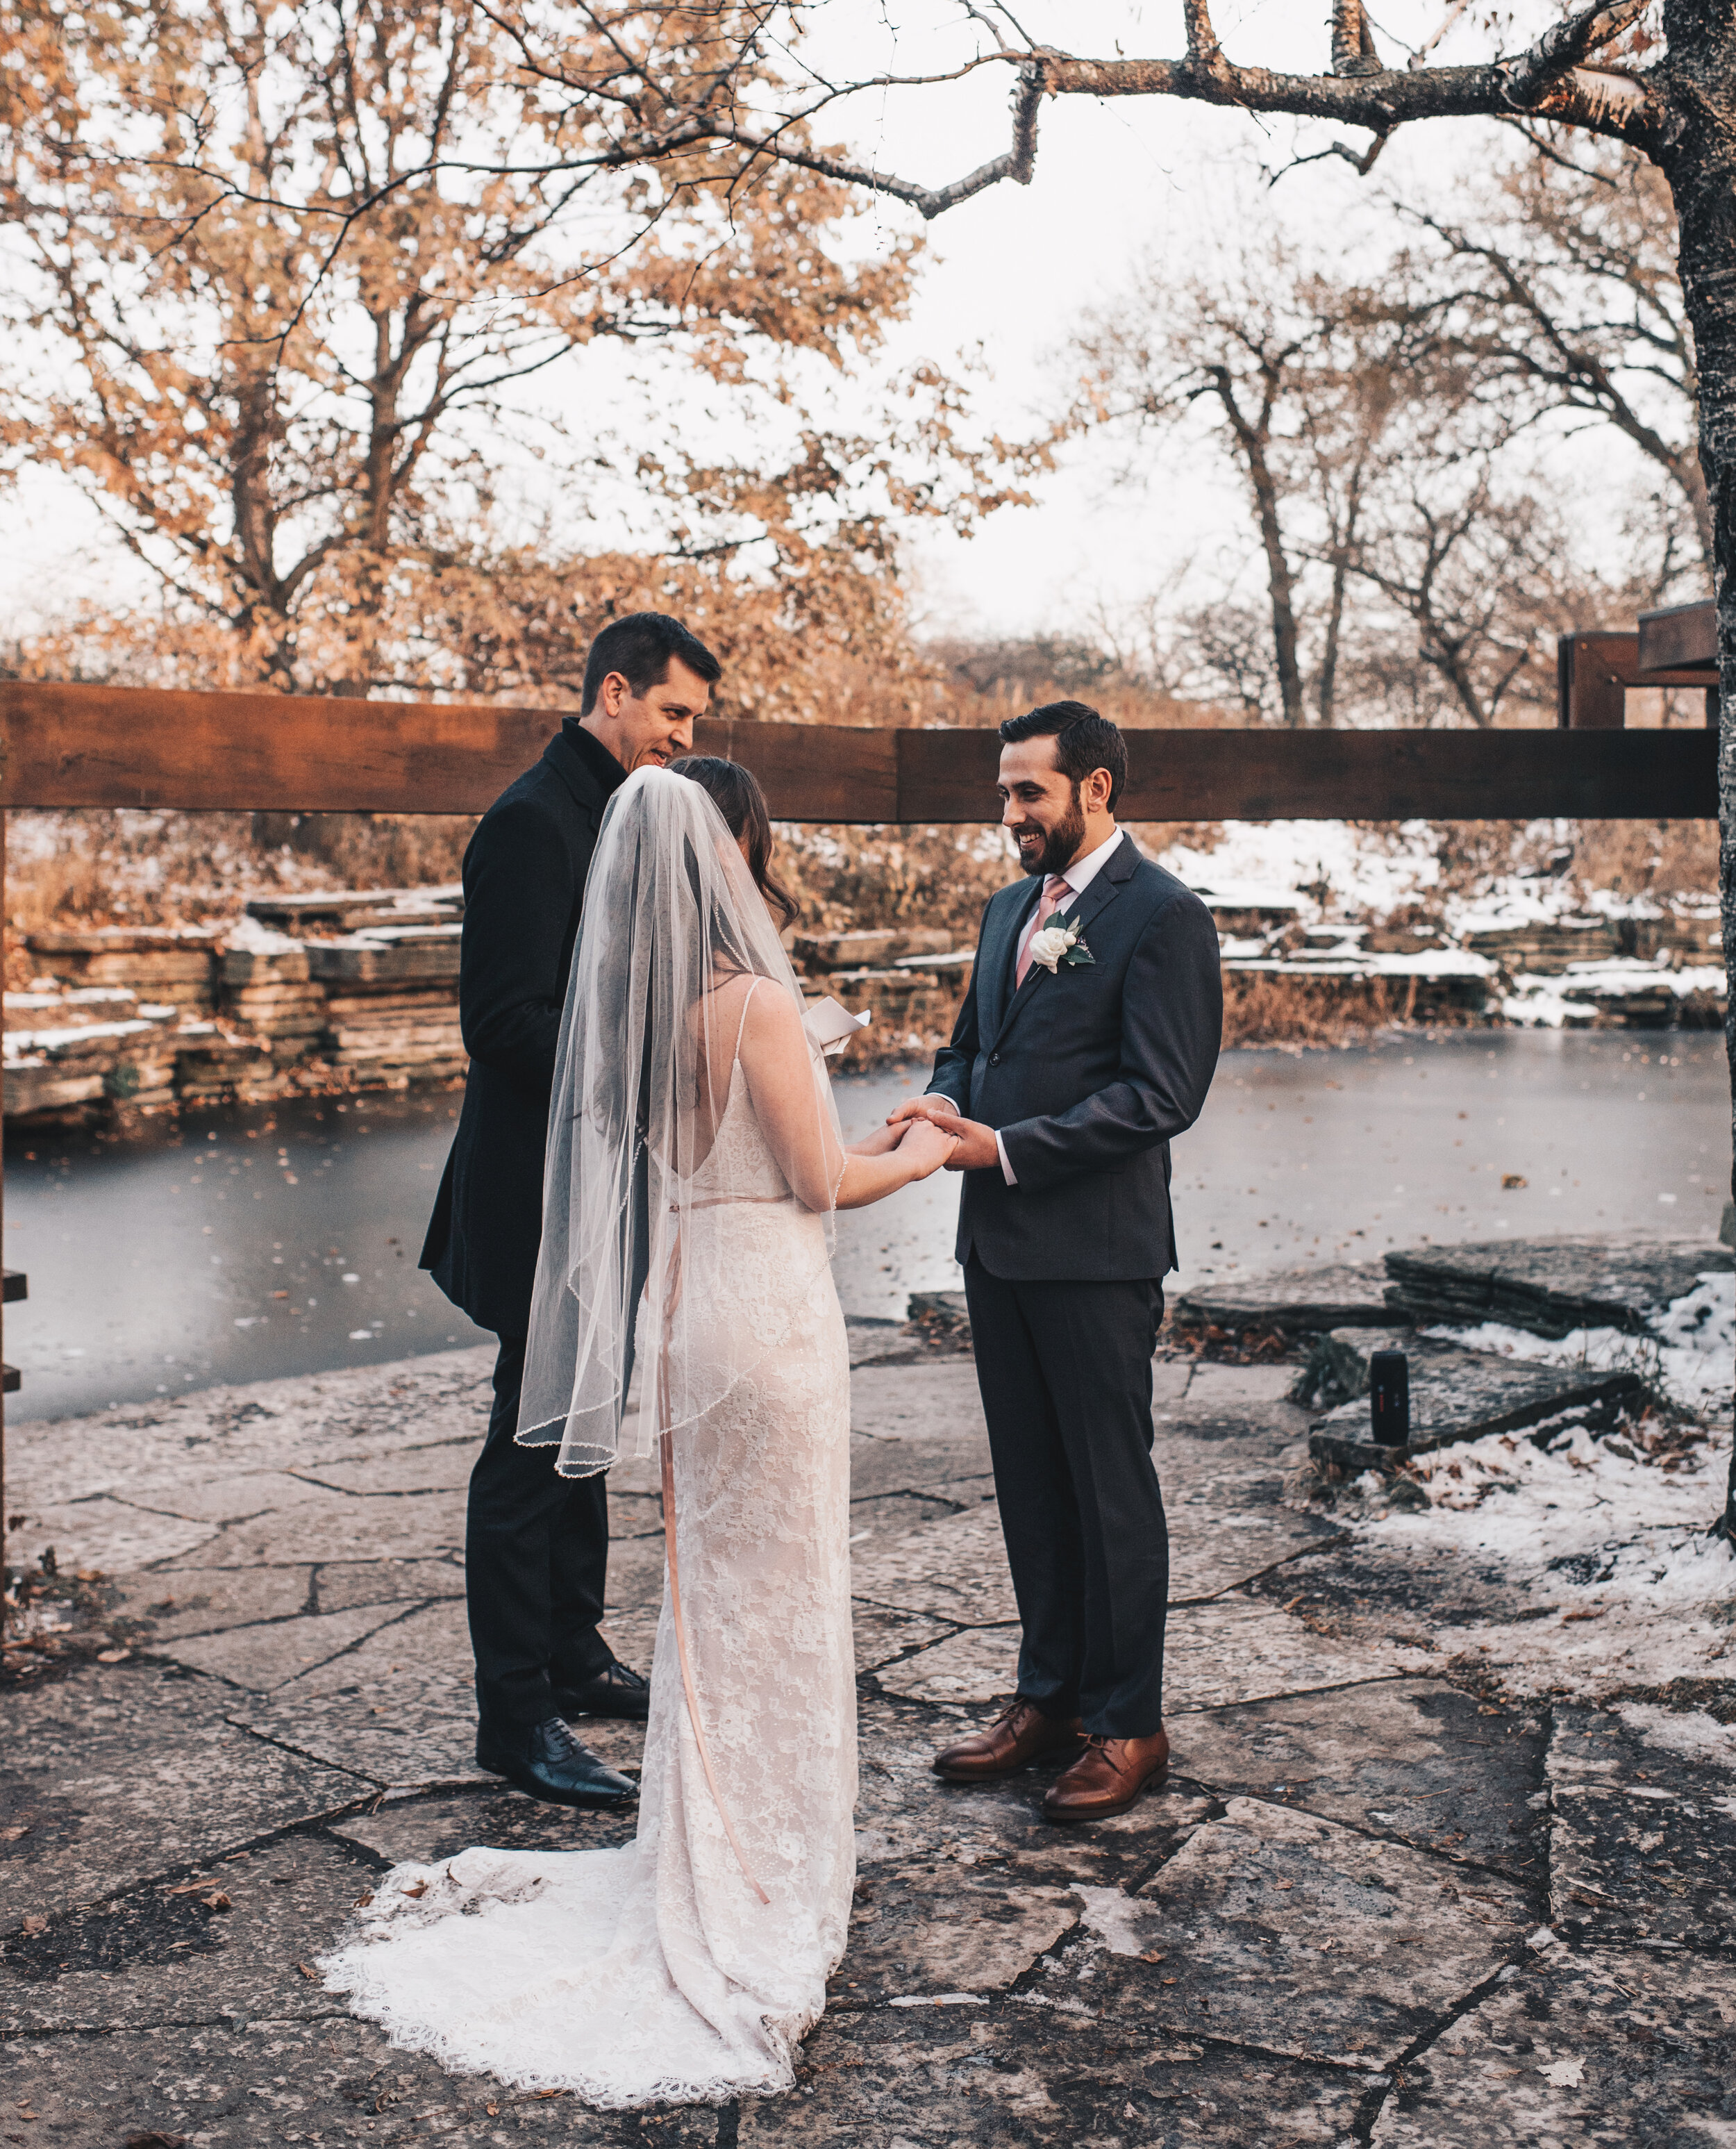 Chicago Wedding, Chicago Elopement, Modern Elegant Simple Wedding, Chicago Modern Elopement, Lincoln Park Zoo Wedding, Alfred Caldwell Lily Pool Wedding, Alfred Caldwell Lily Pool Ceremony